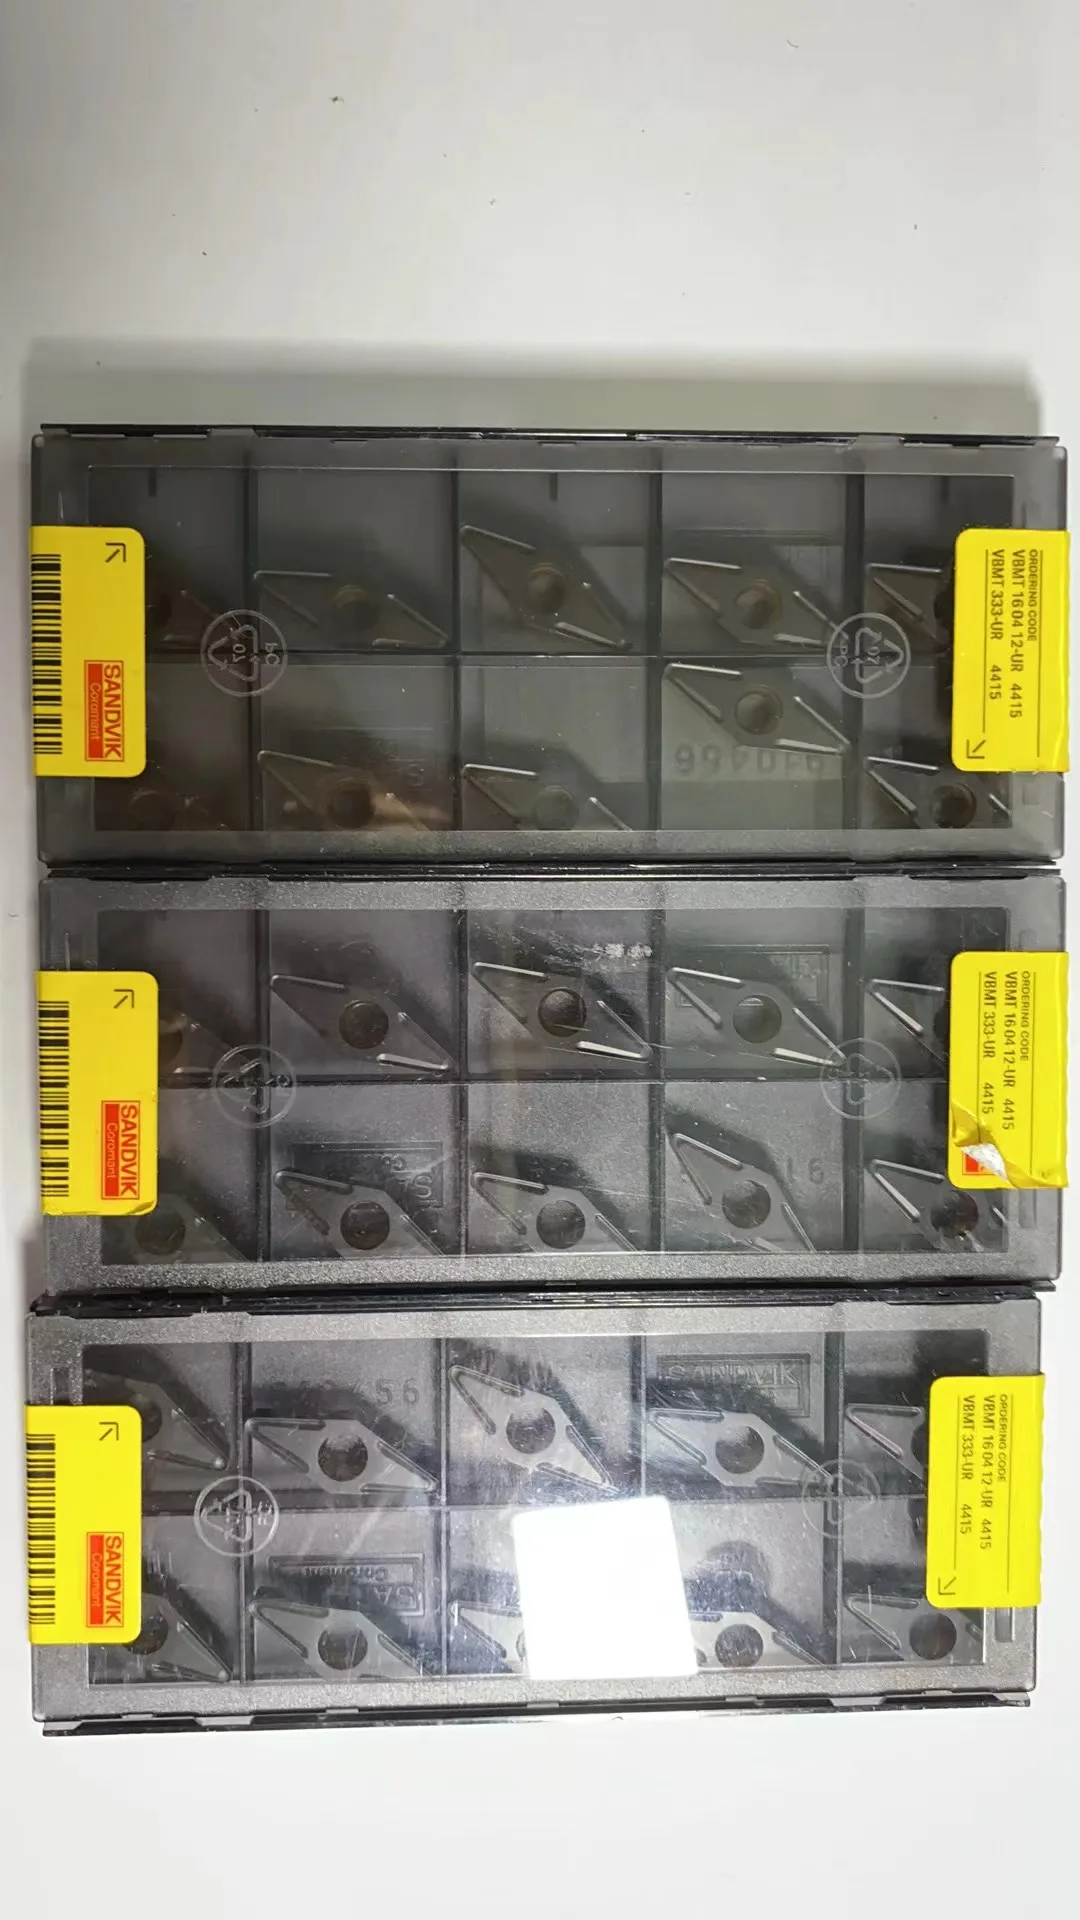 

CNC blade VBMT160412-UR 4415 clearance special price, original and authentic, only 3 boxes